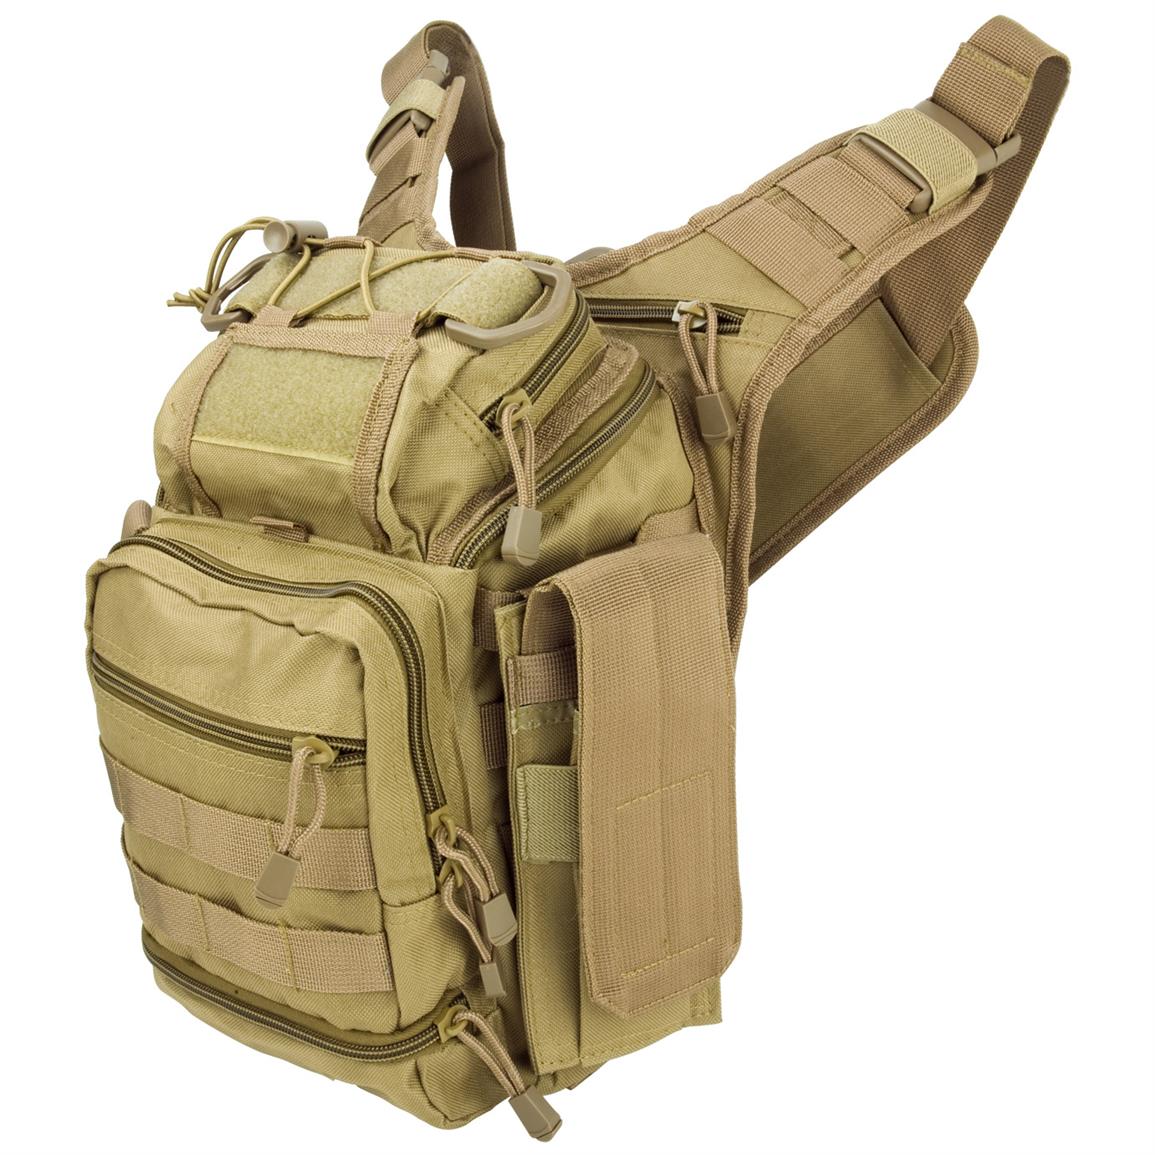 VISM by NcSTAR First Responder Utility Bag - 613602, Military Style ...